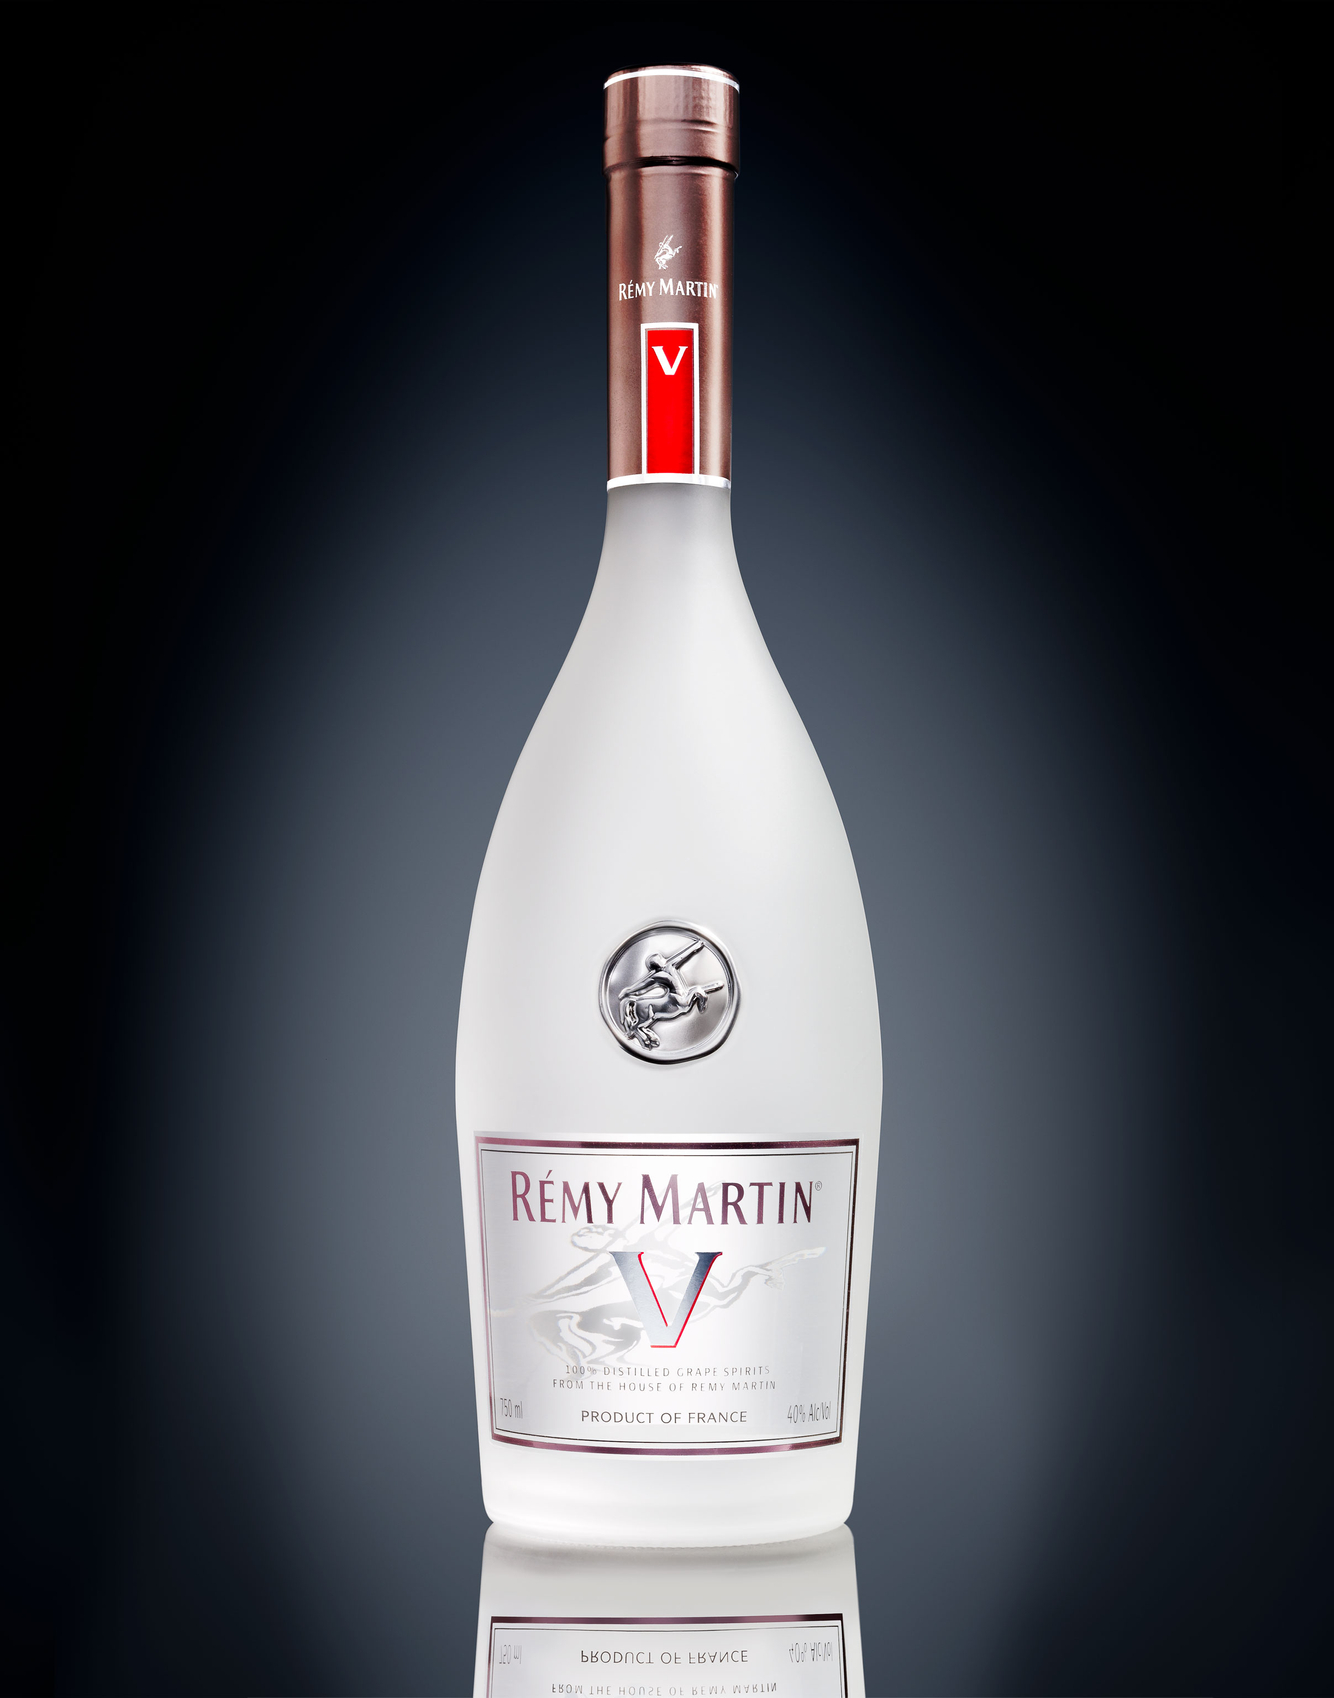 Remy Martin Advertising Campaign